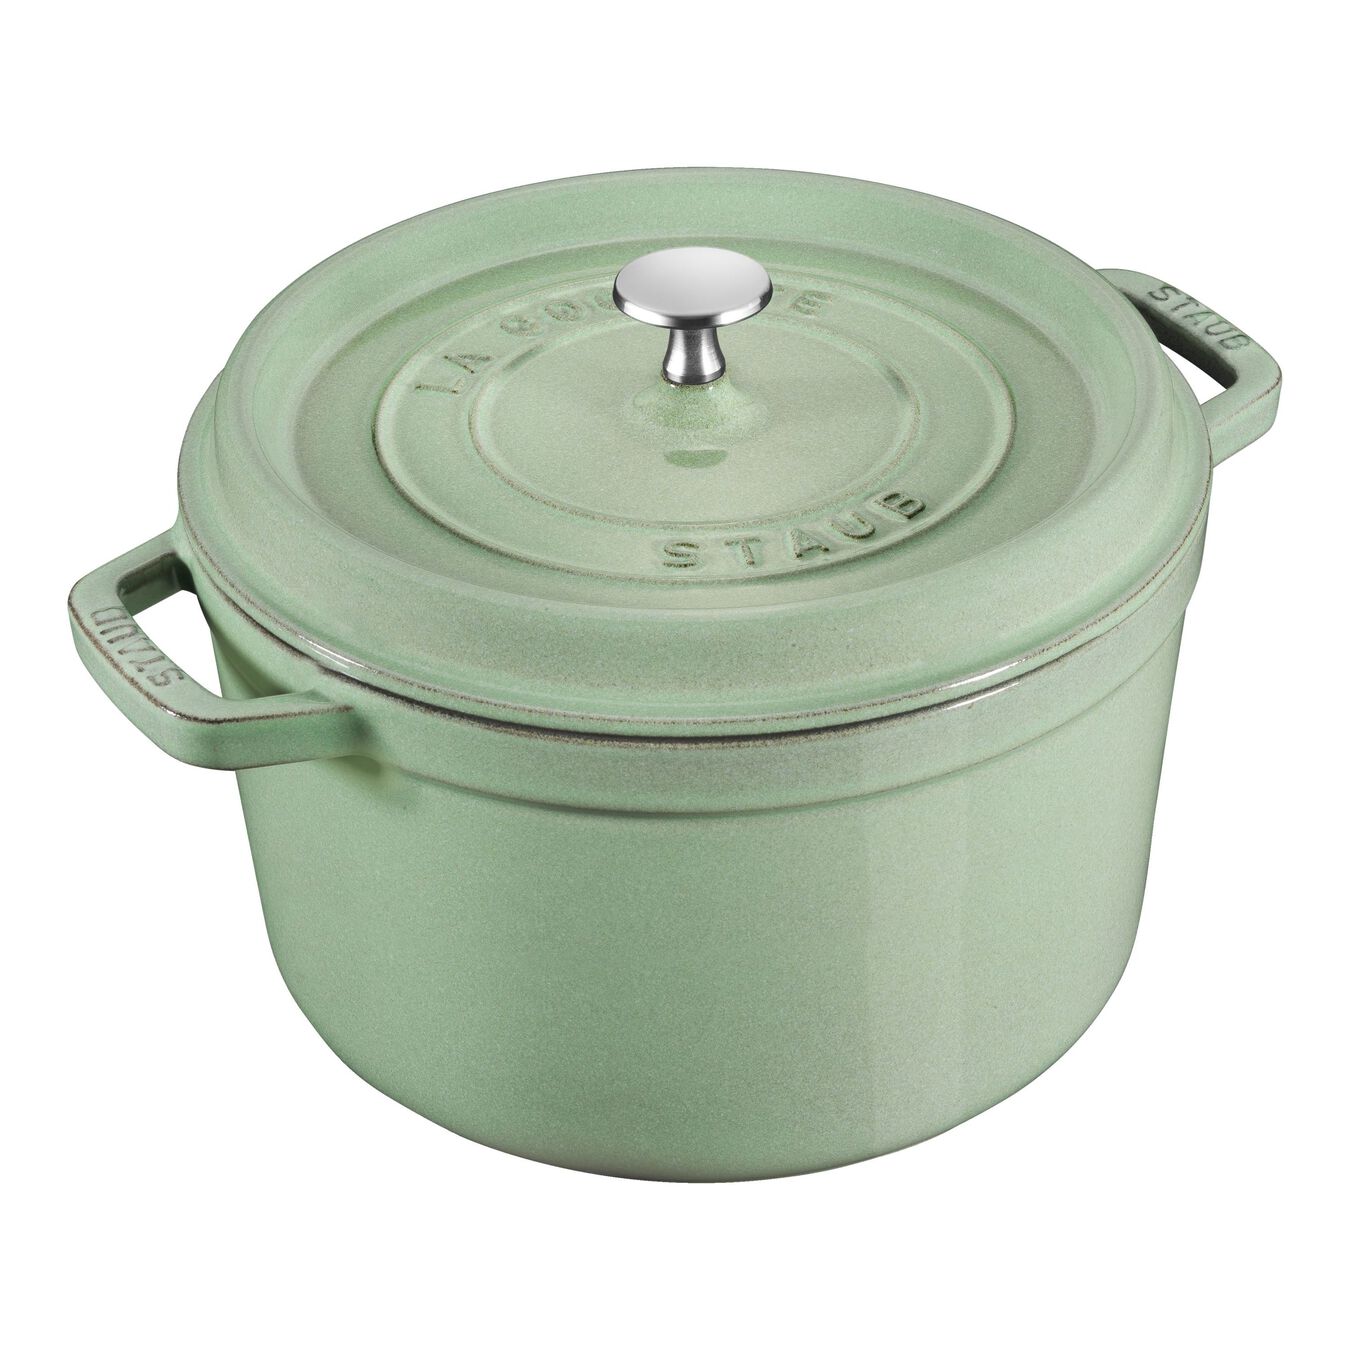 4.75 l cast iron round Cocotte deep, sage - Visual Imperfections,,large 1